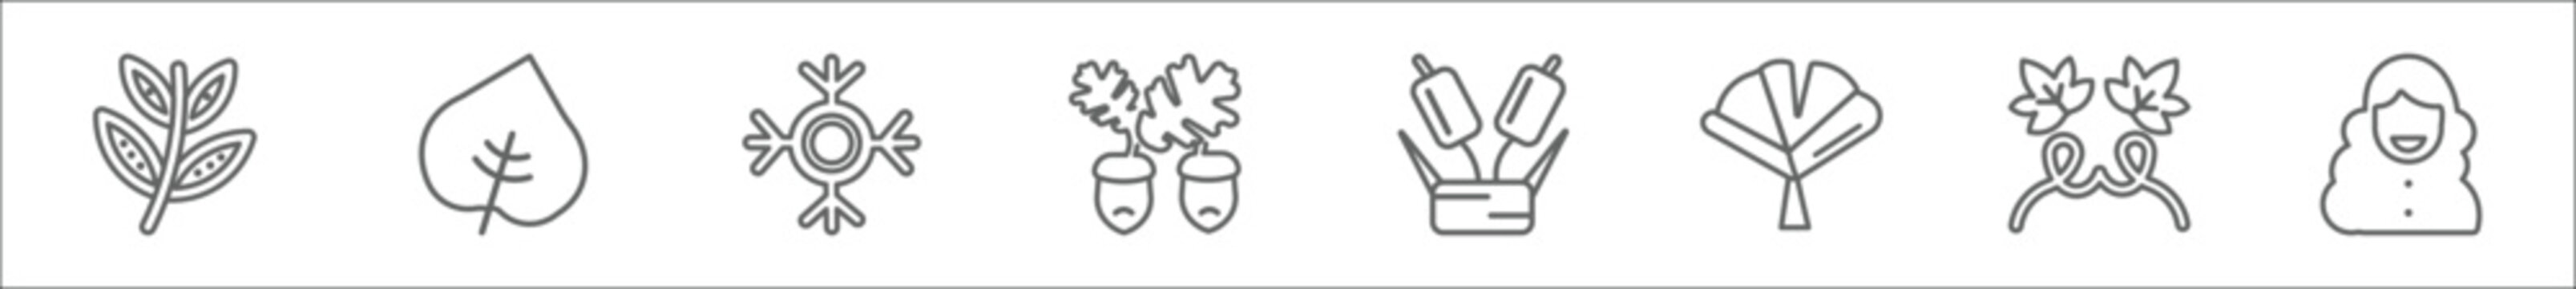 outline set of nature line icons. linear vector icons such as black willow, cordate, big snowflake, nut leaf, reed bed, apricot leaf leaf, grape hair style